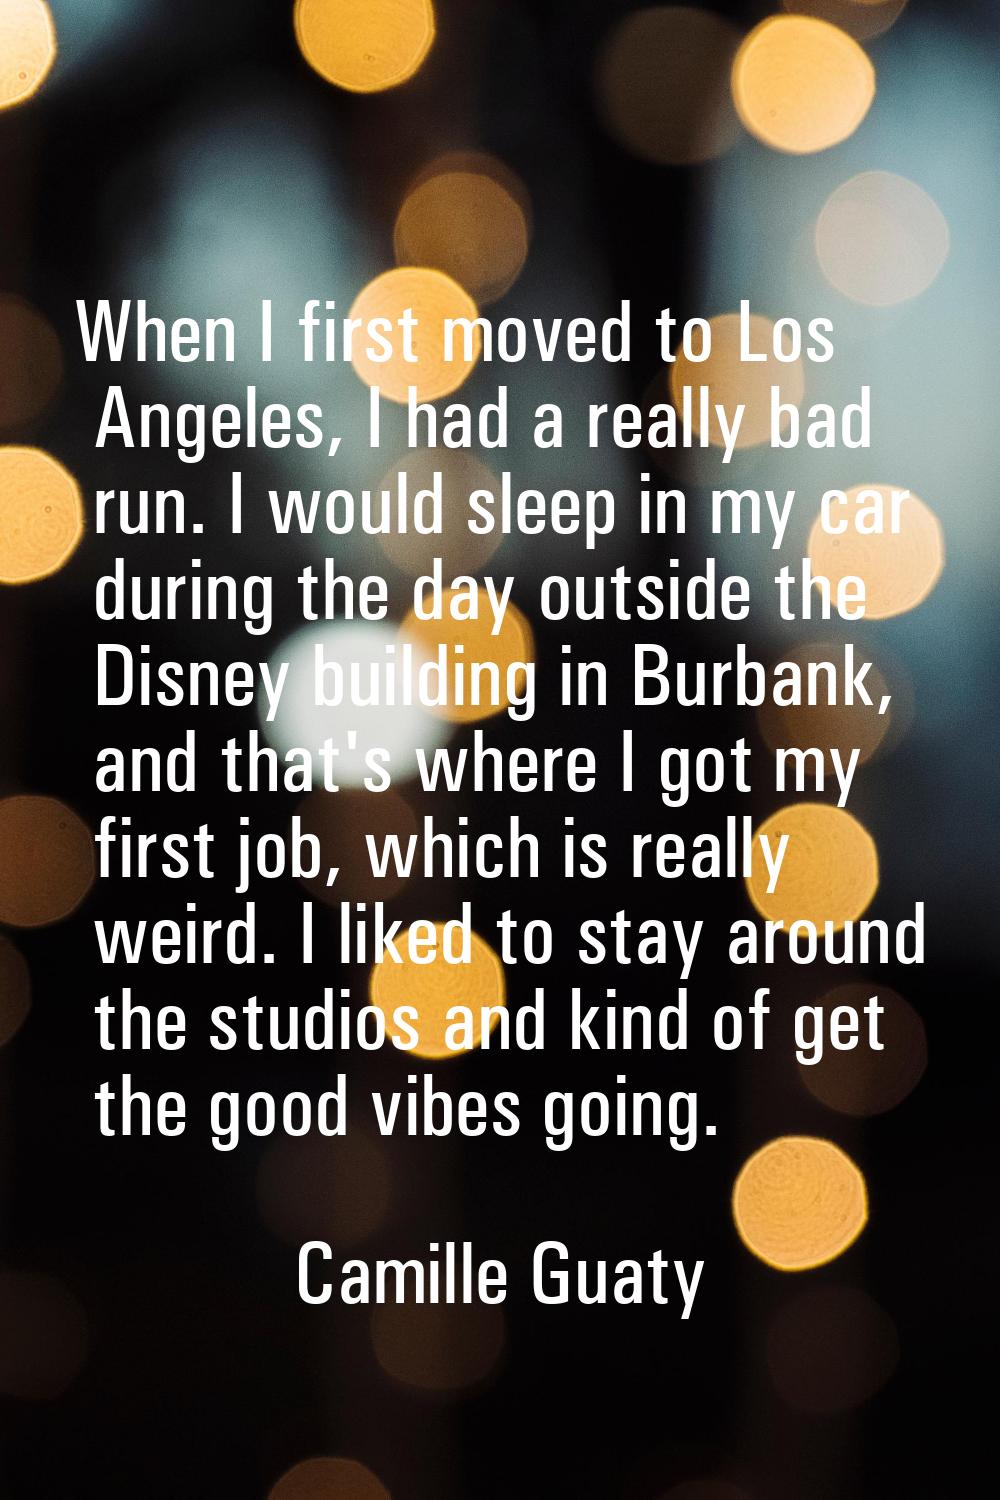 When I first moved to Los Angeles, I had a really bad run. I would sleep in my car during the day o